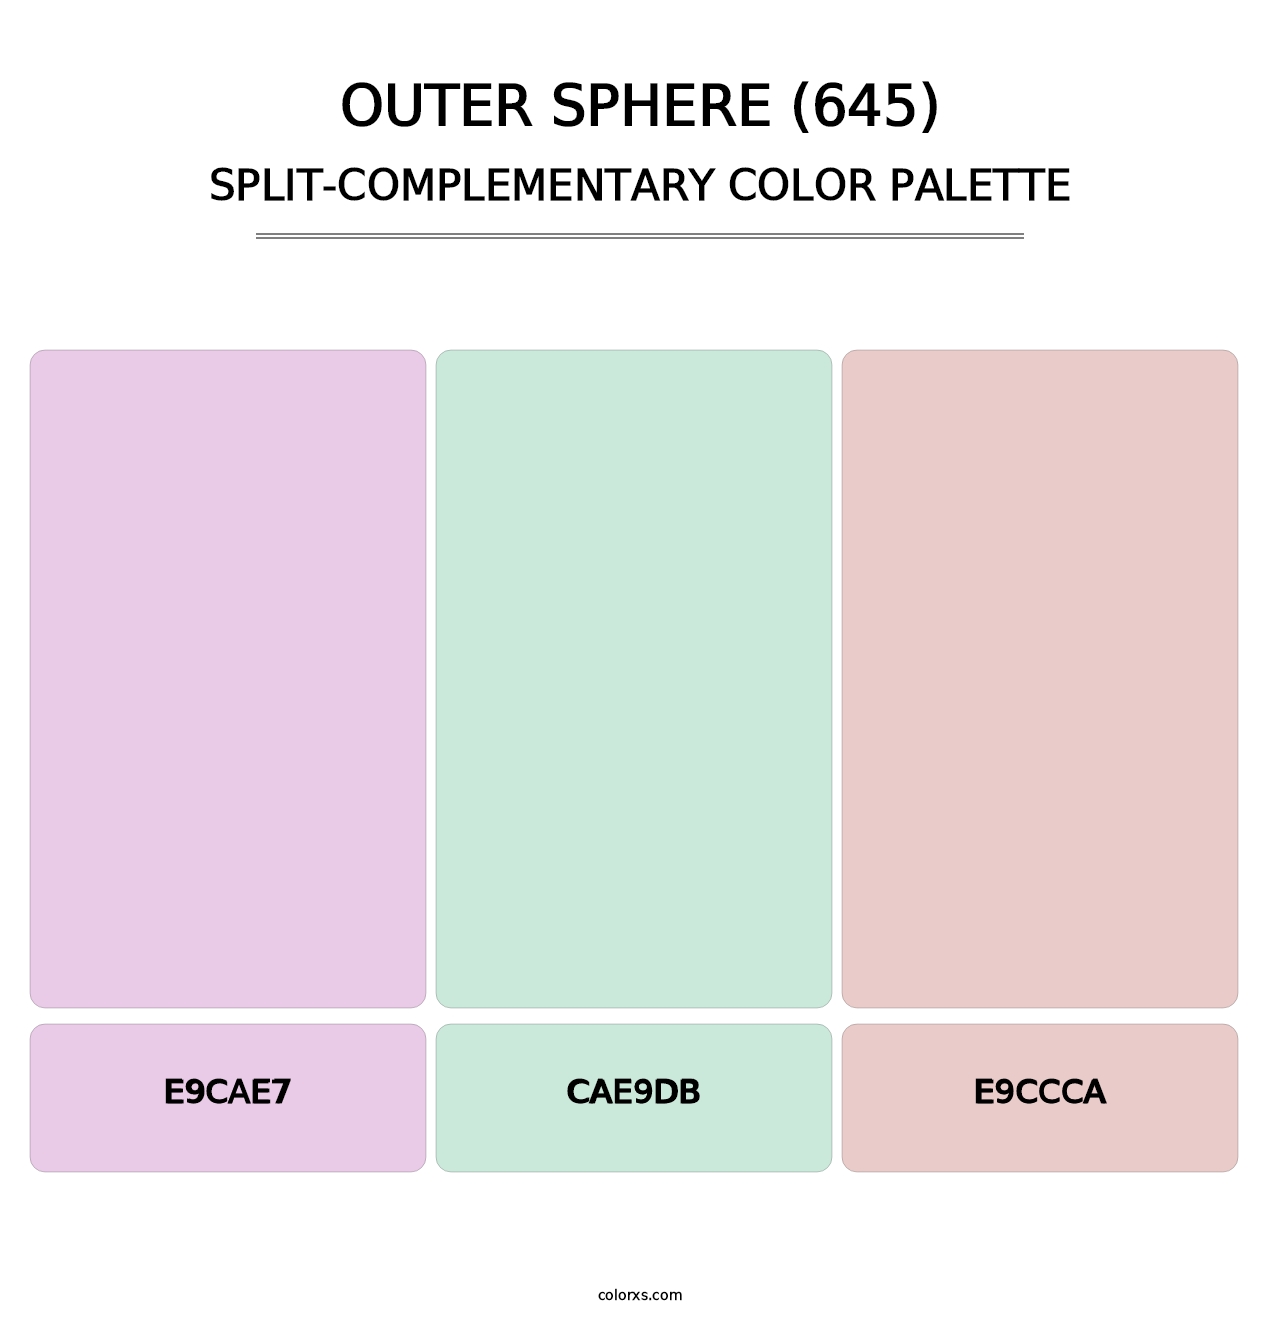 Outer Sphere (645) - Split-Complementary Color Palette